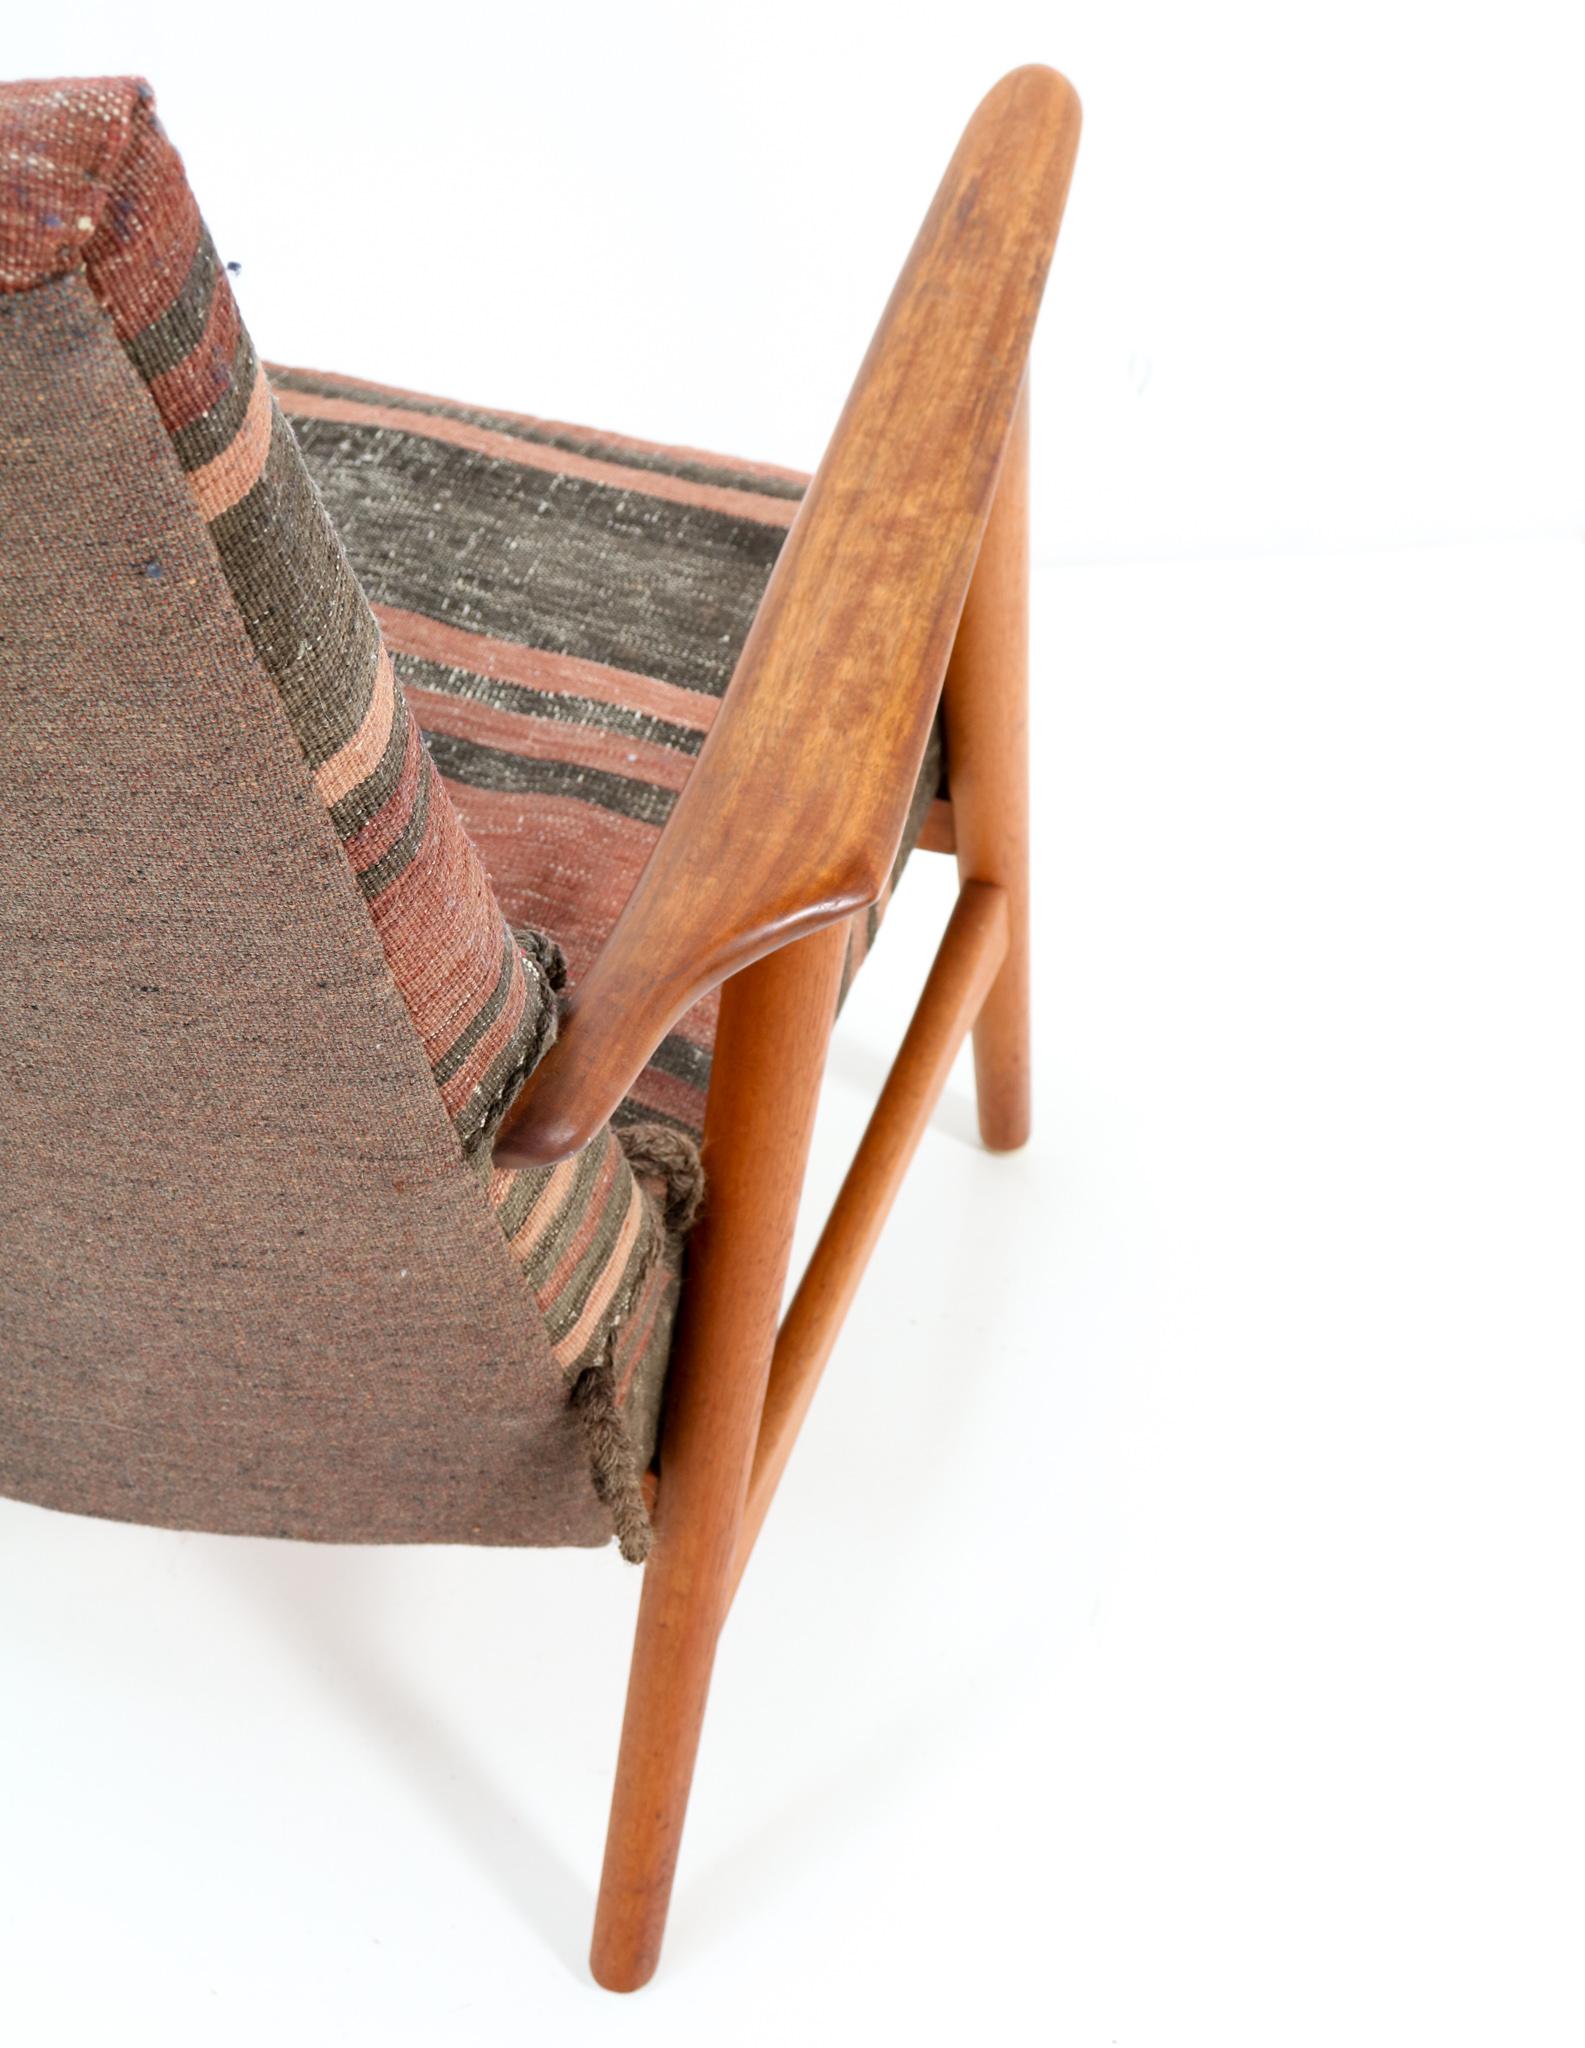 Teak Mid-Century Modern Lounge Chair with Kilim Upholstery, 1960s For Sale 1